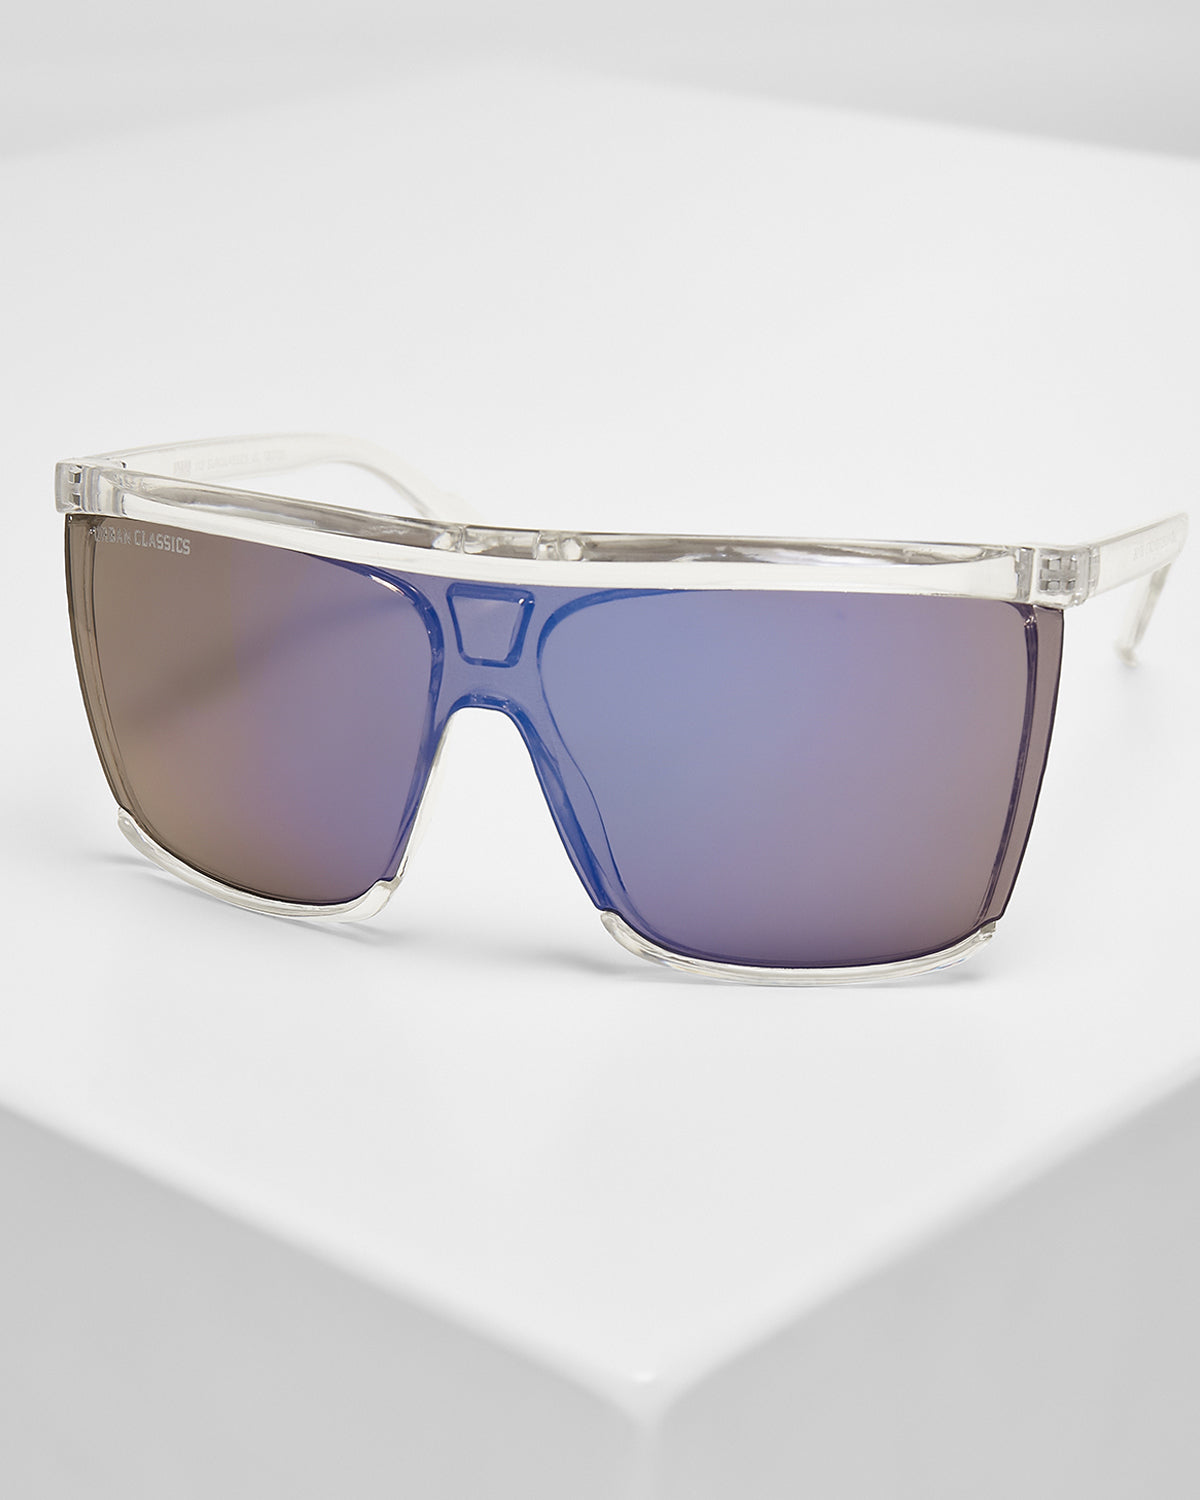 Men's sunglasses from domestic online store